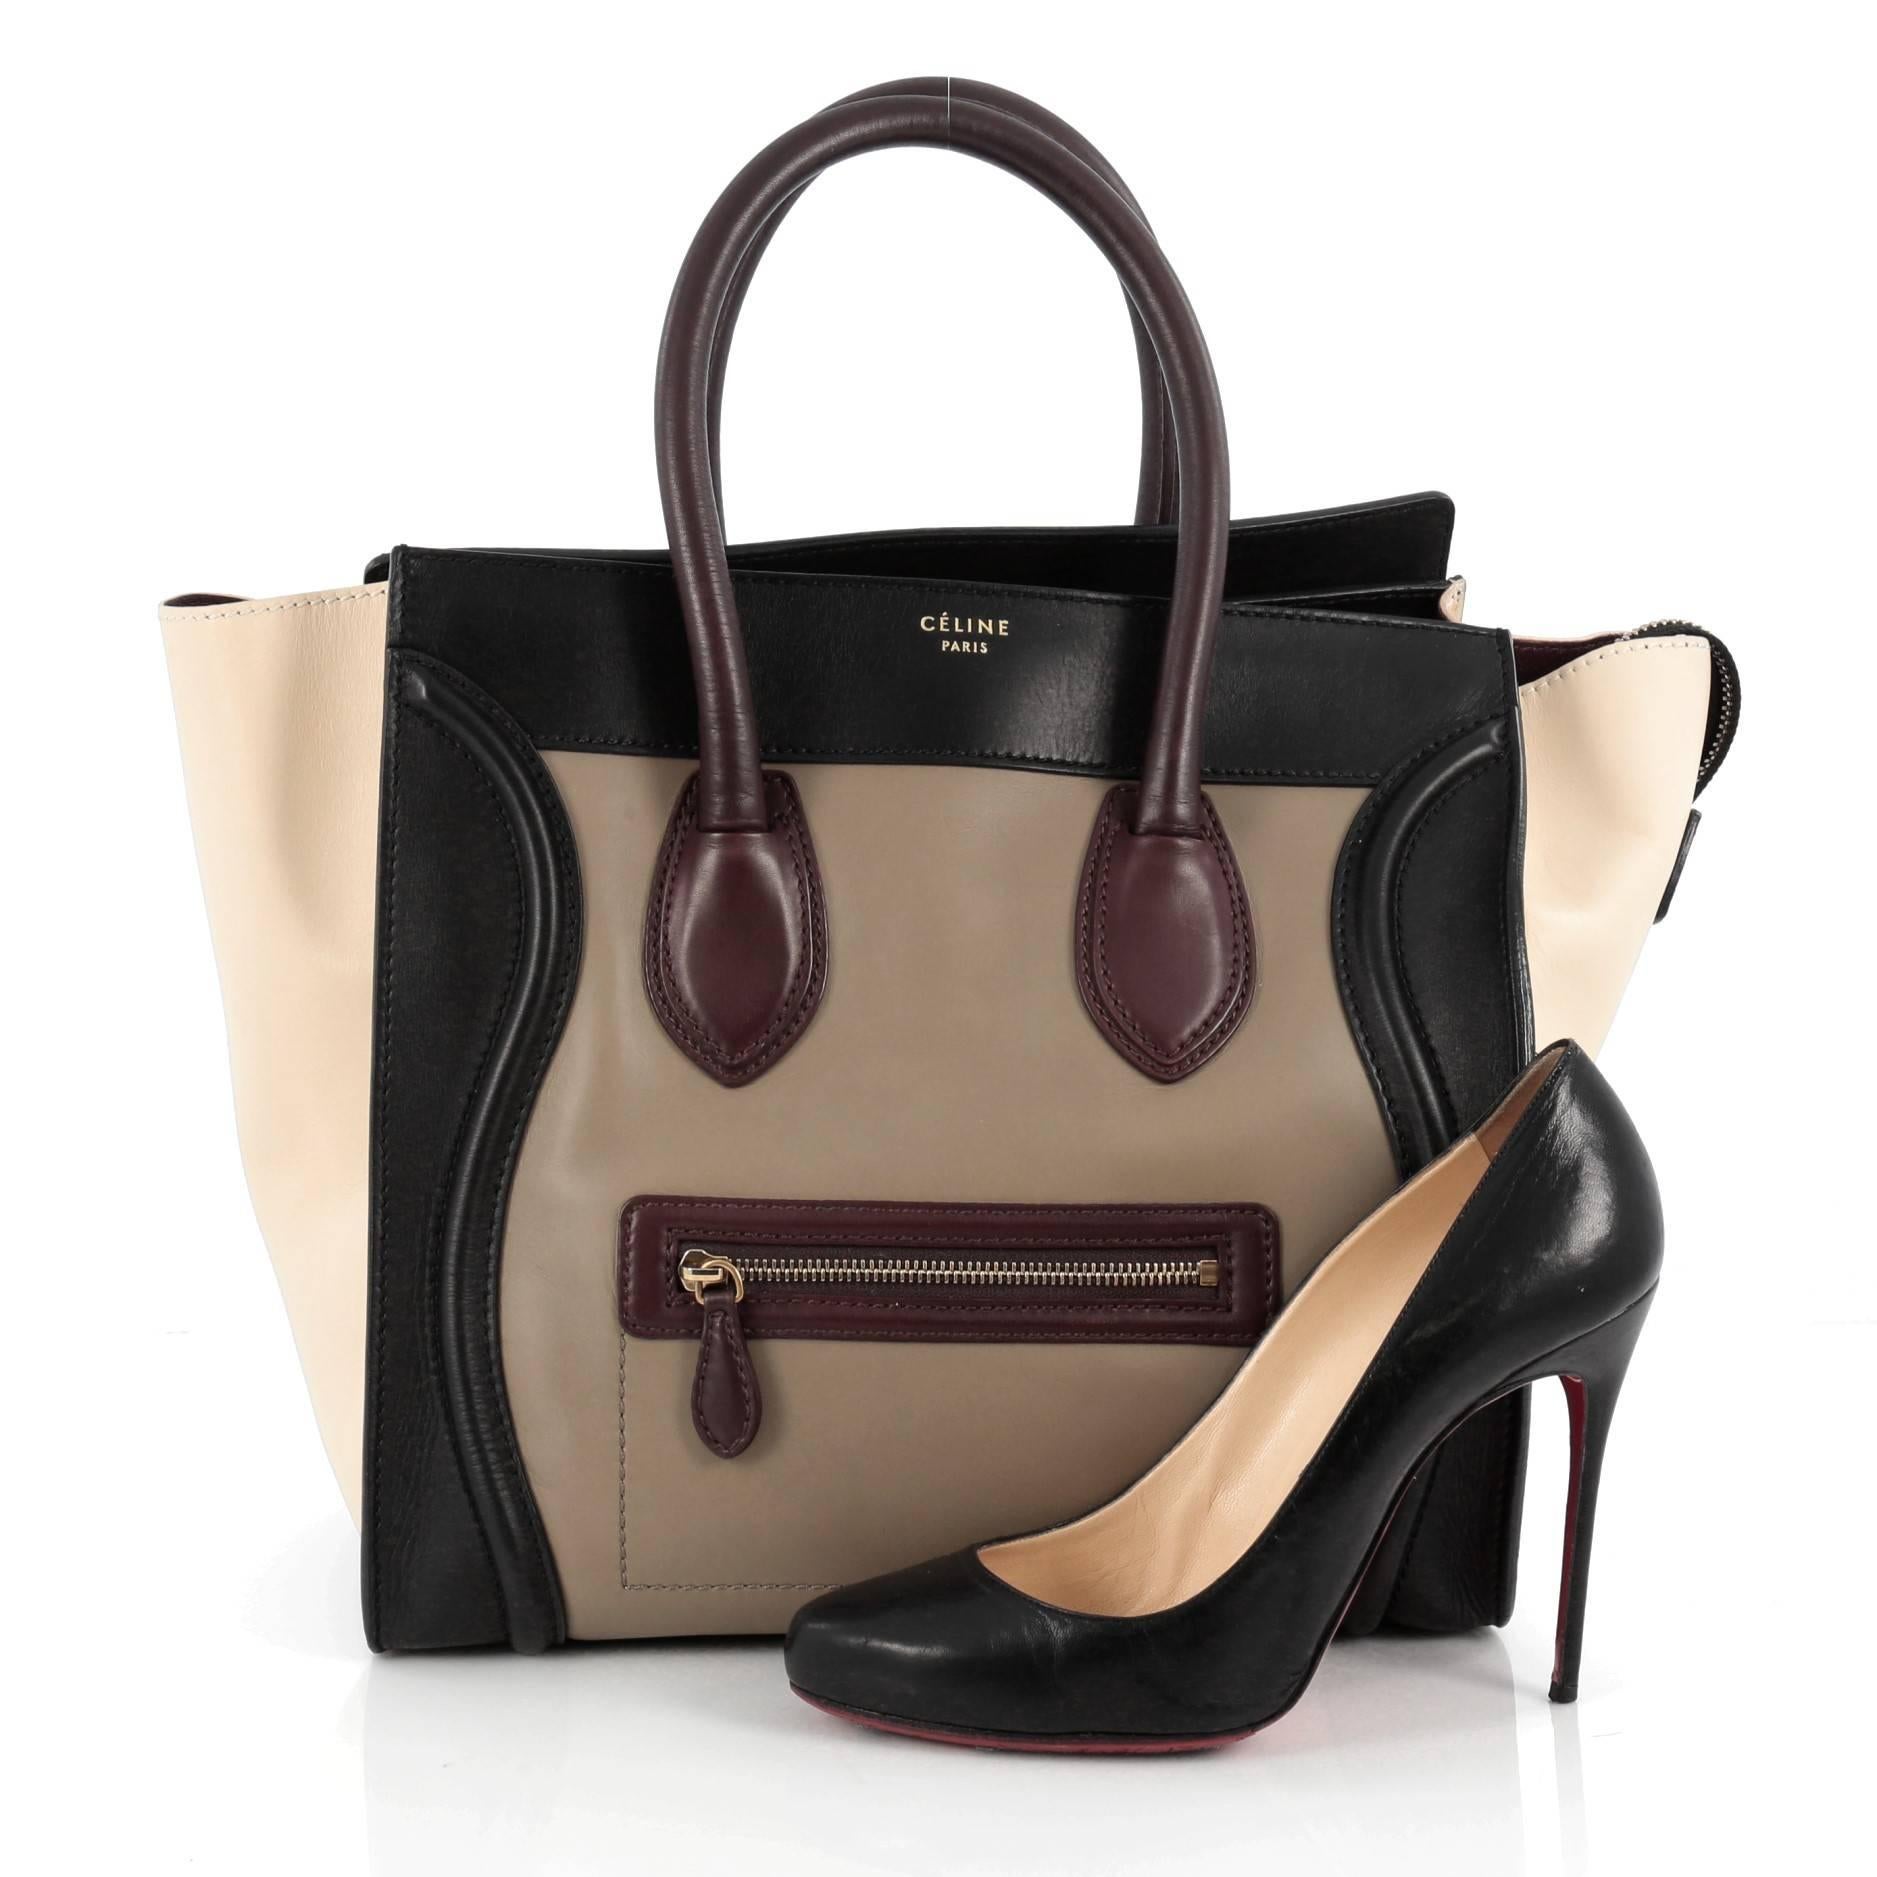 This authentic Celine Multicolor Luggage Handbag Leather Mini showcases an elegant day-to-day style essential for any fashionista. Constructed in beautiful taupe, black, maroon and off-white leather, this popular tote features a front zipper pocket,